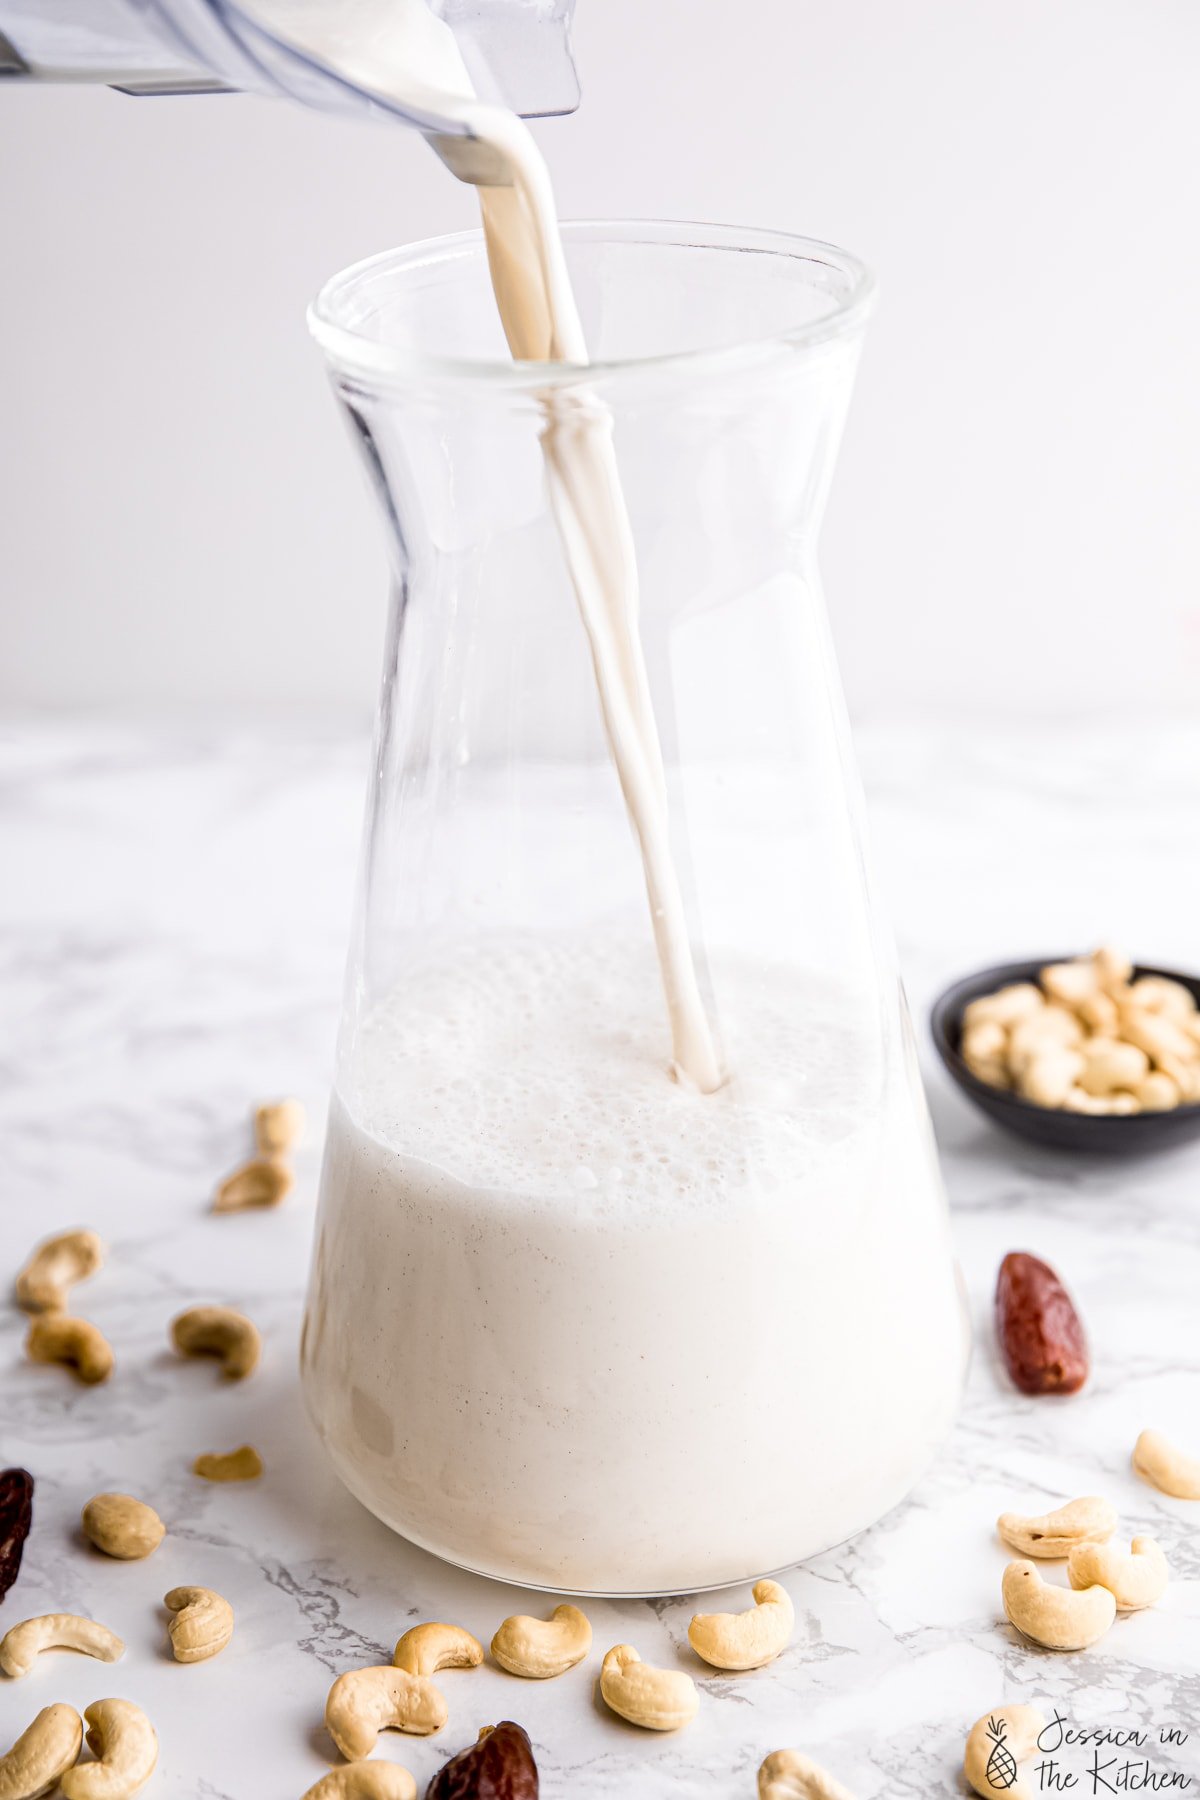 Cashew milk being poured into a container.